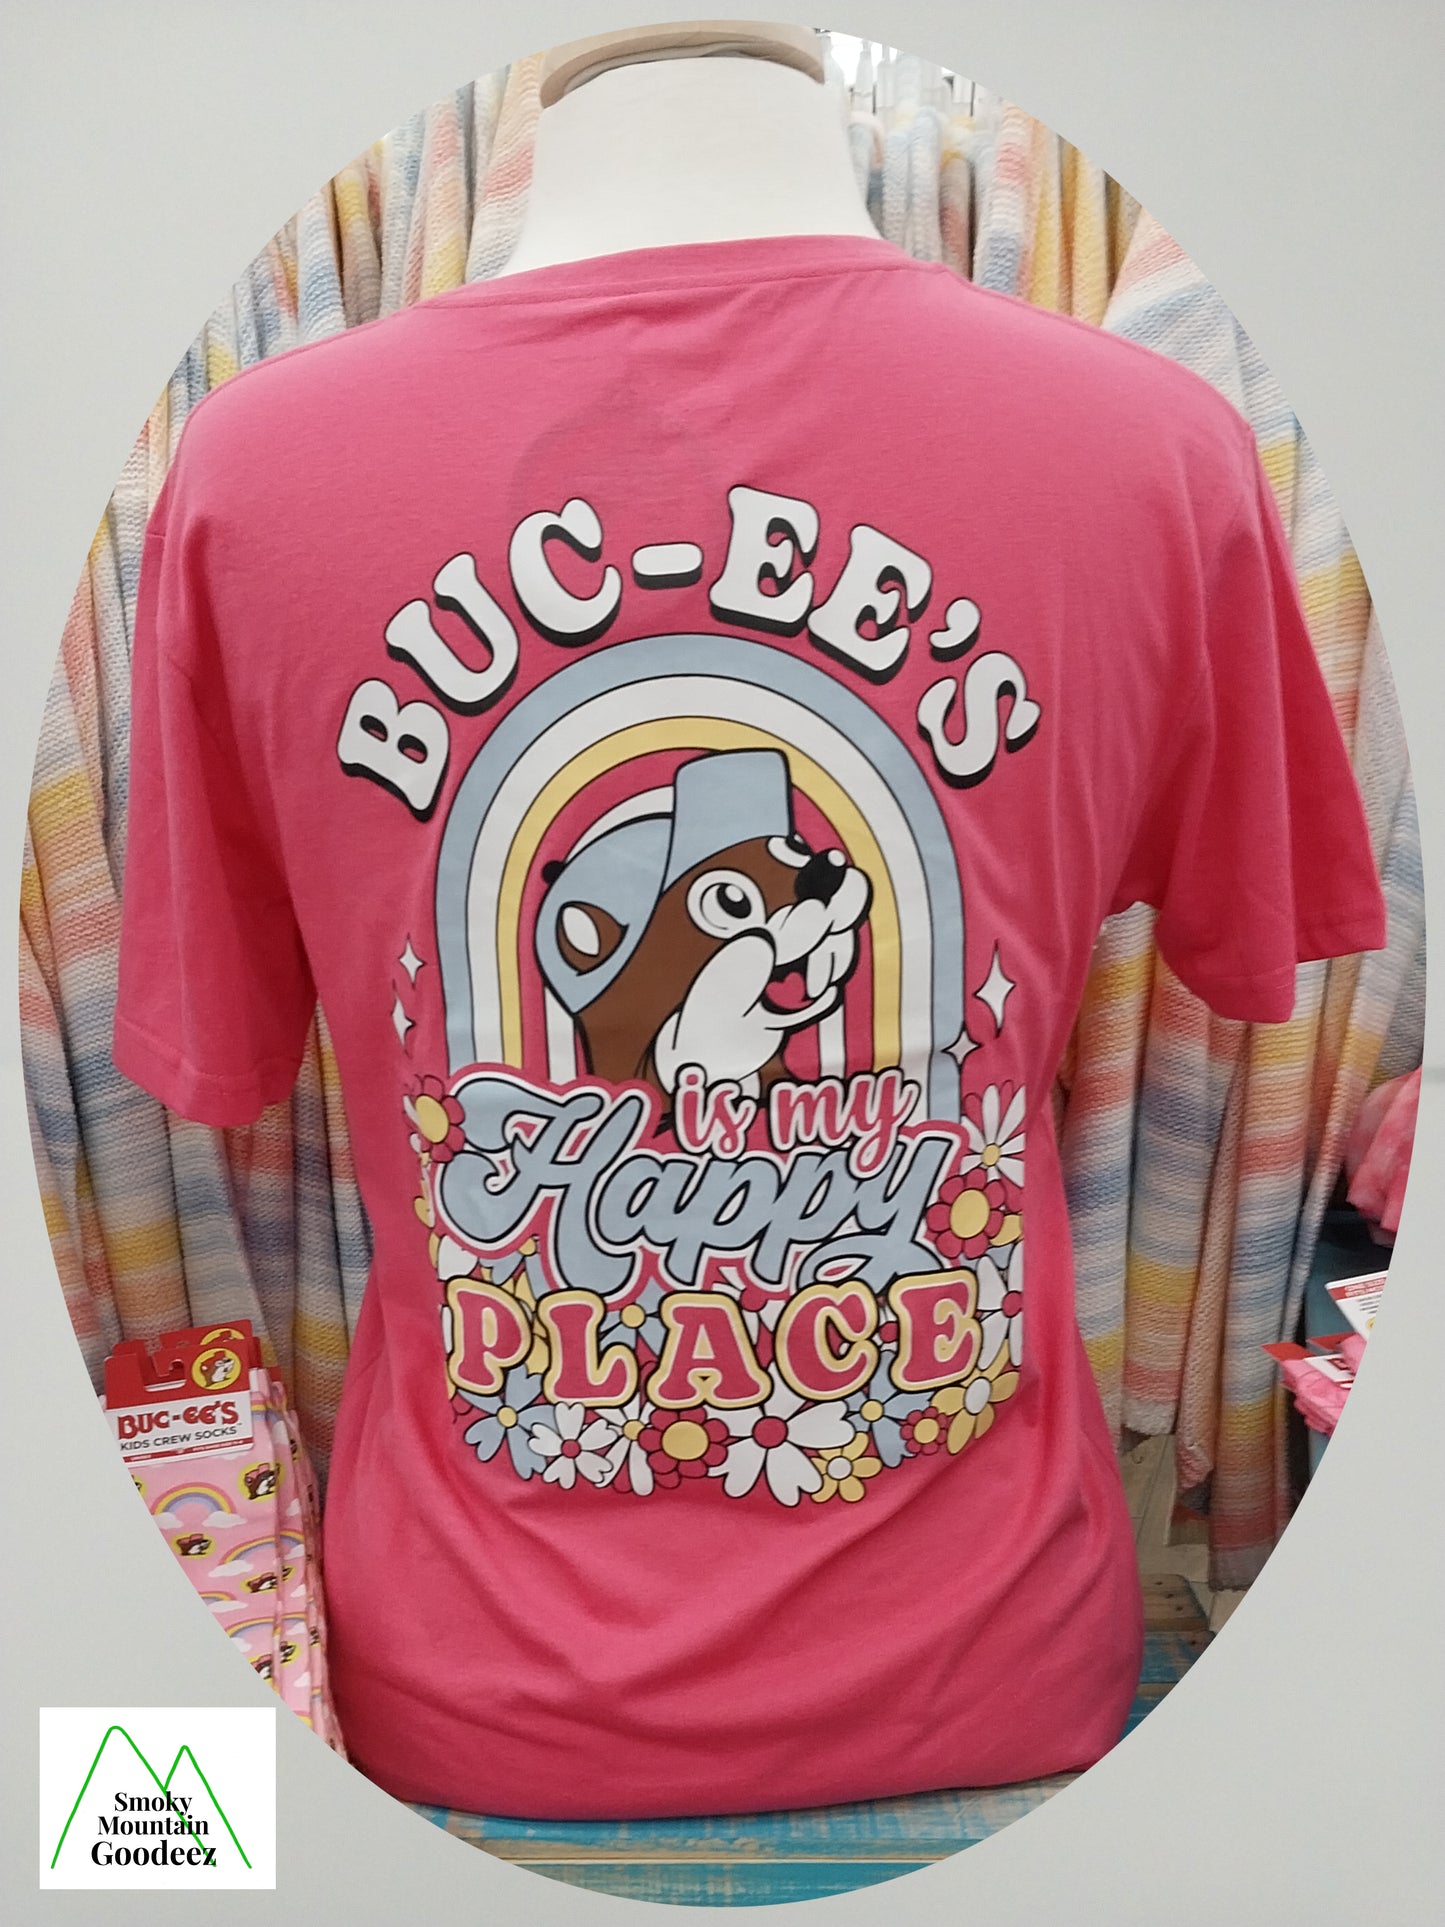 Buc-ee's "Buc-ee's Is My Happy Place" T-shirt